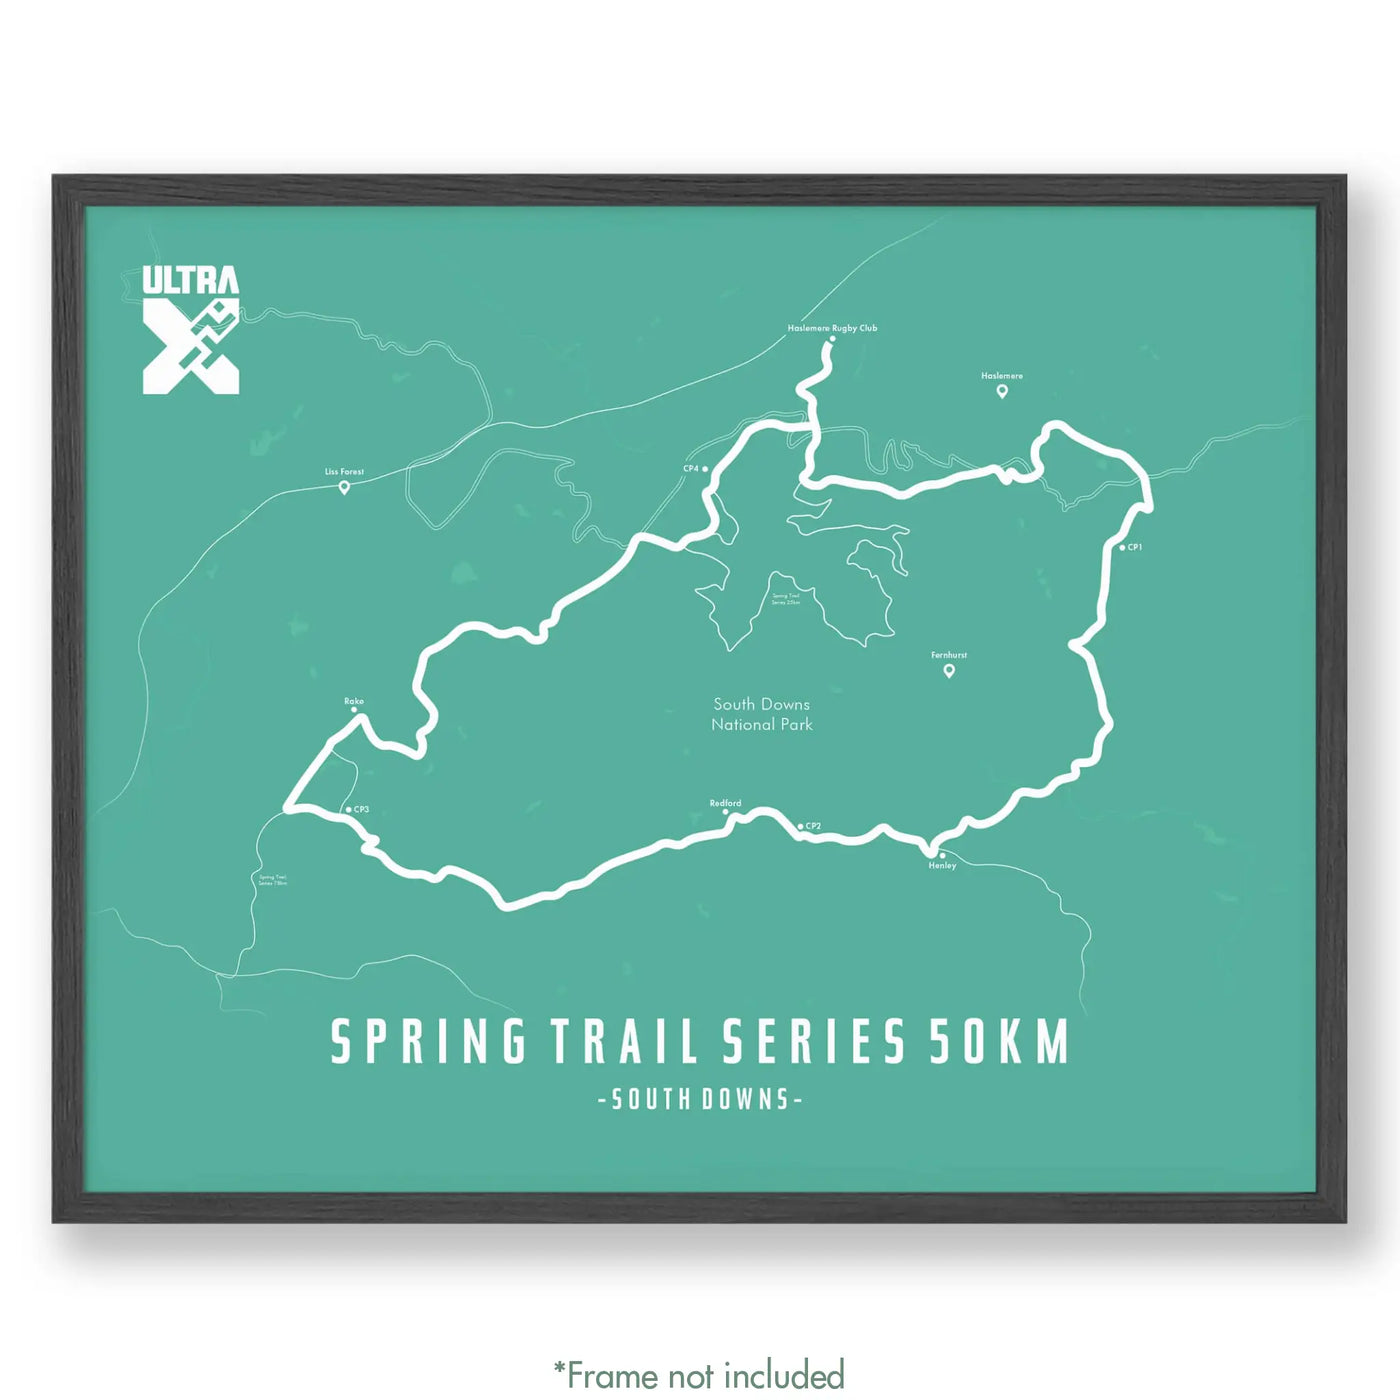 Trail Poster of Ultra X Spring Trail Series 50km - Teal